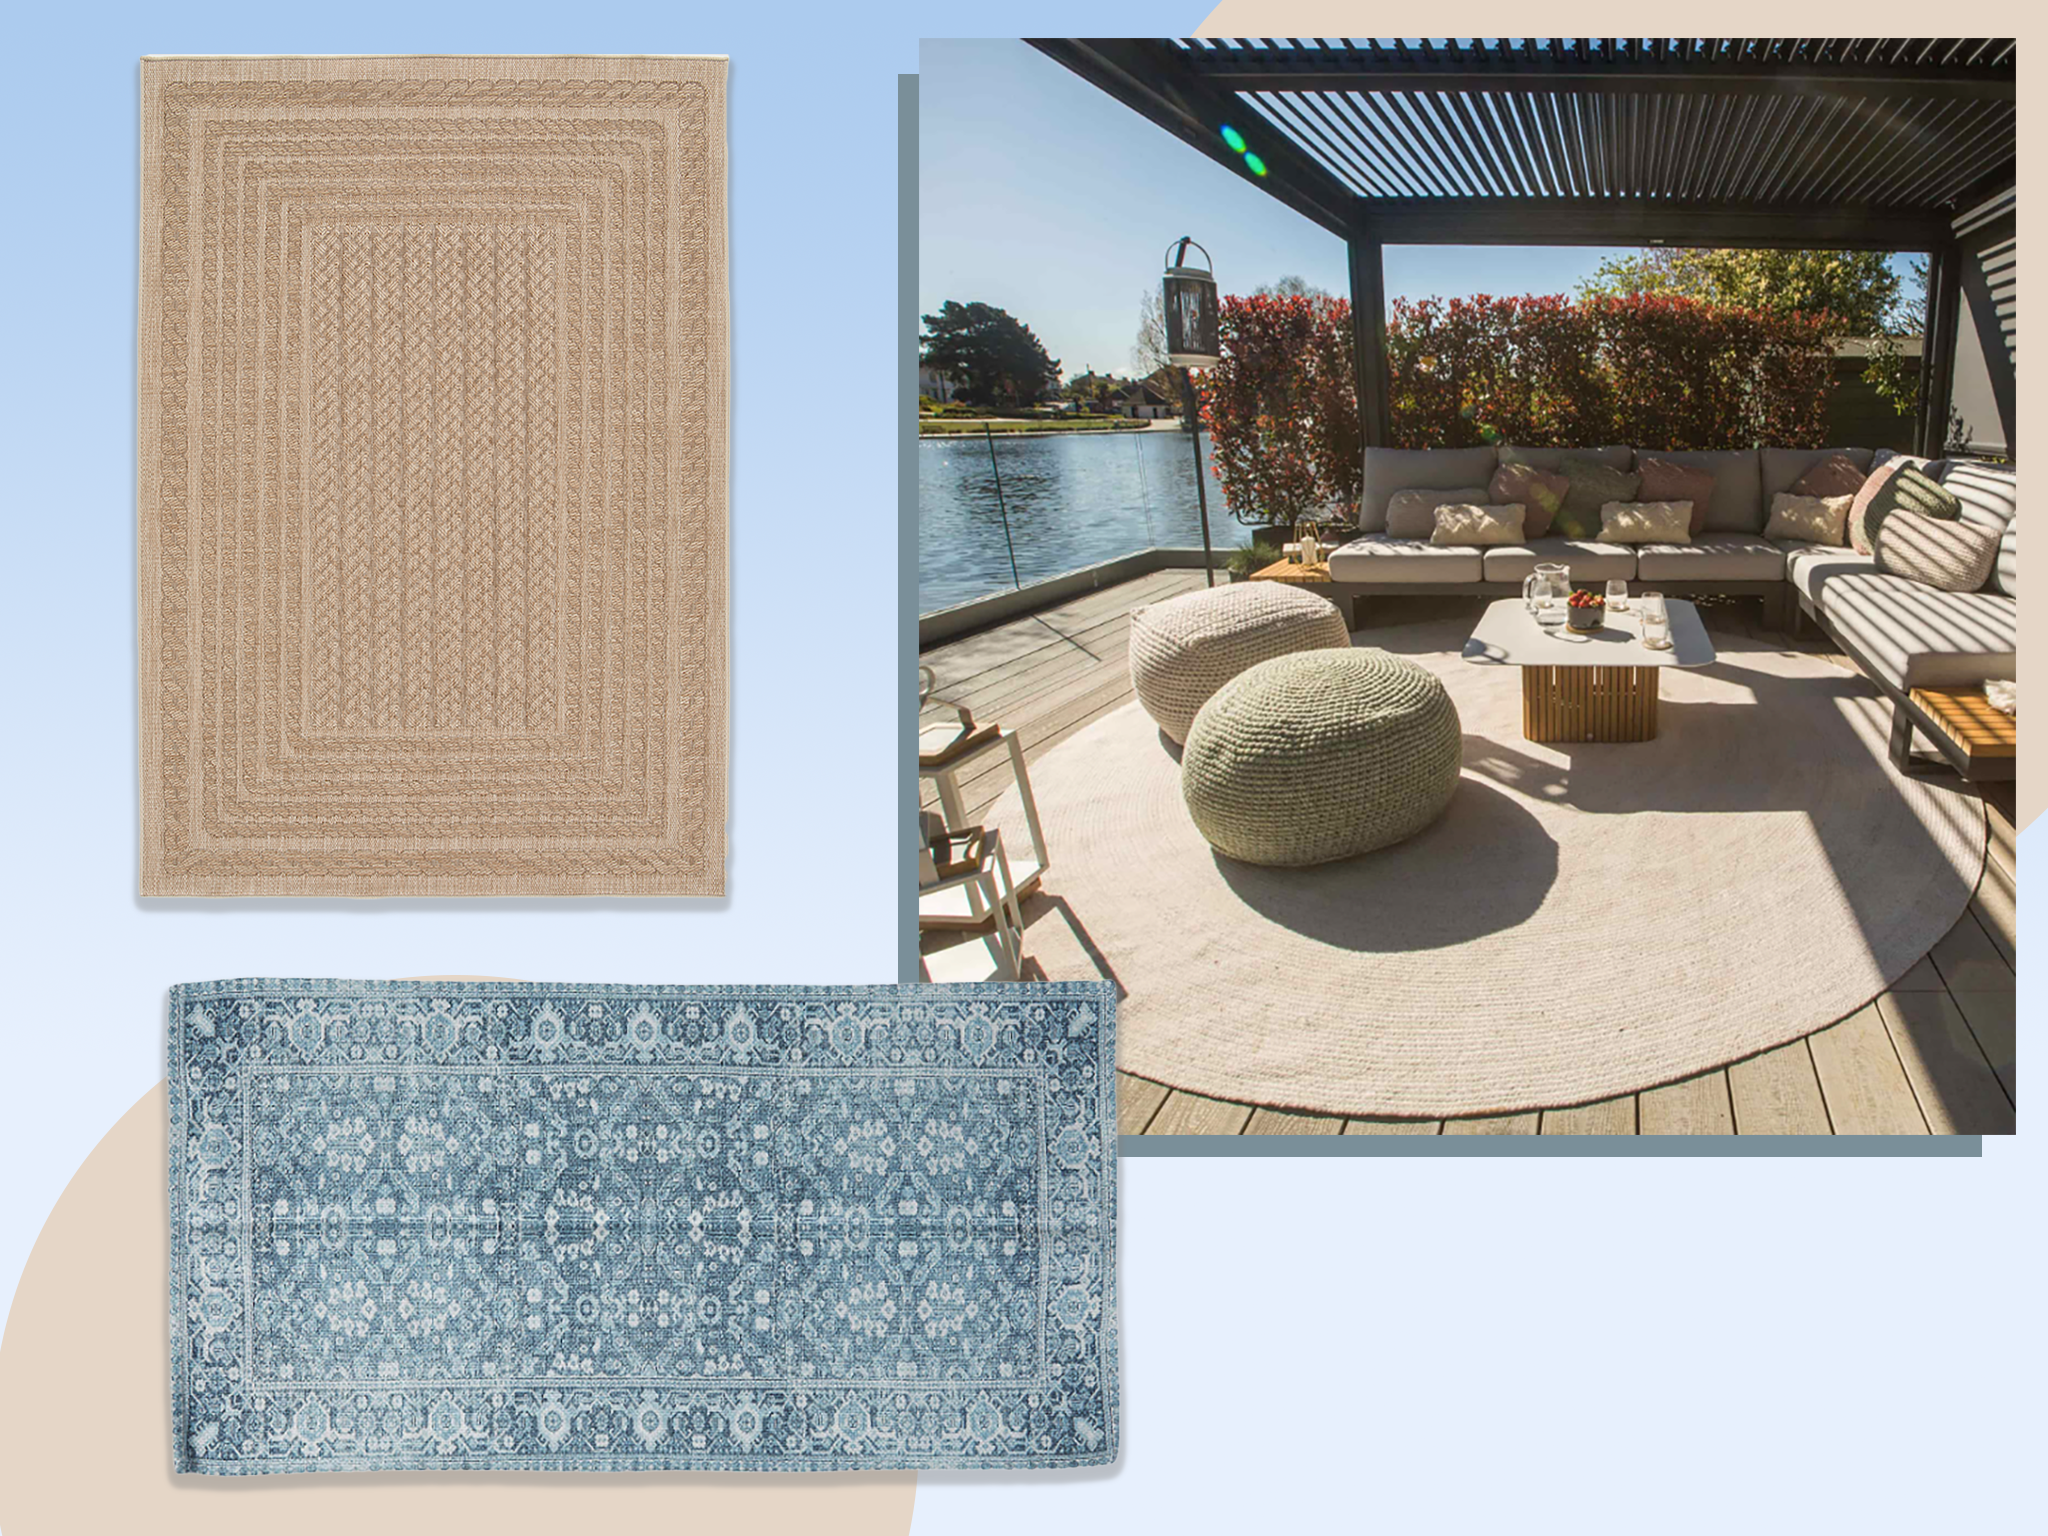 We considered different colourways, shapes and selected rugs for a wide range of price points